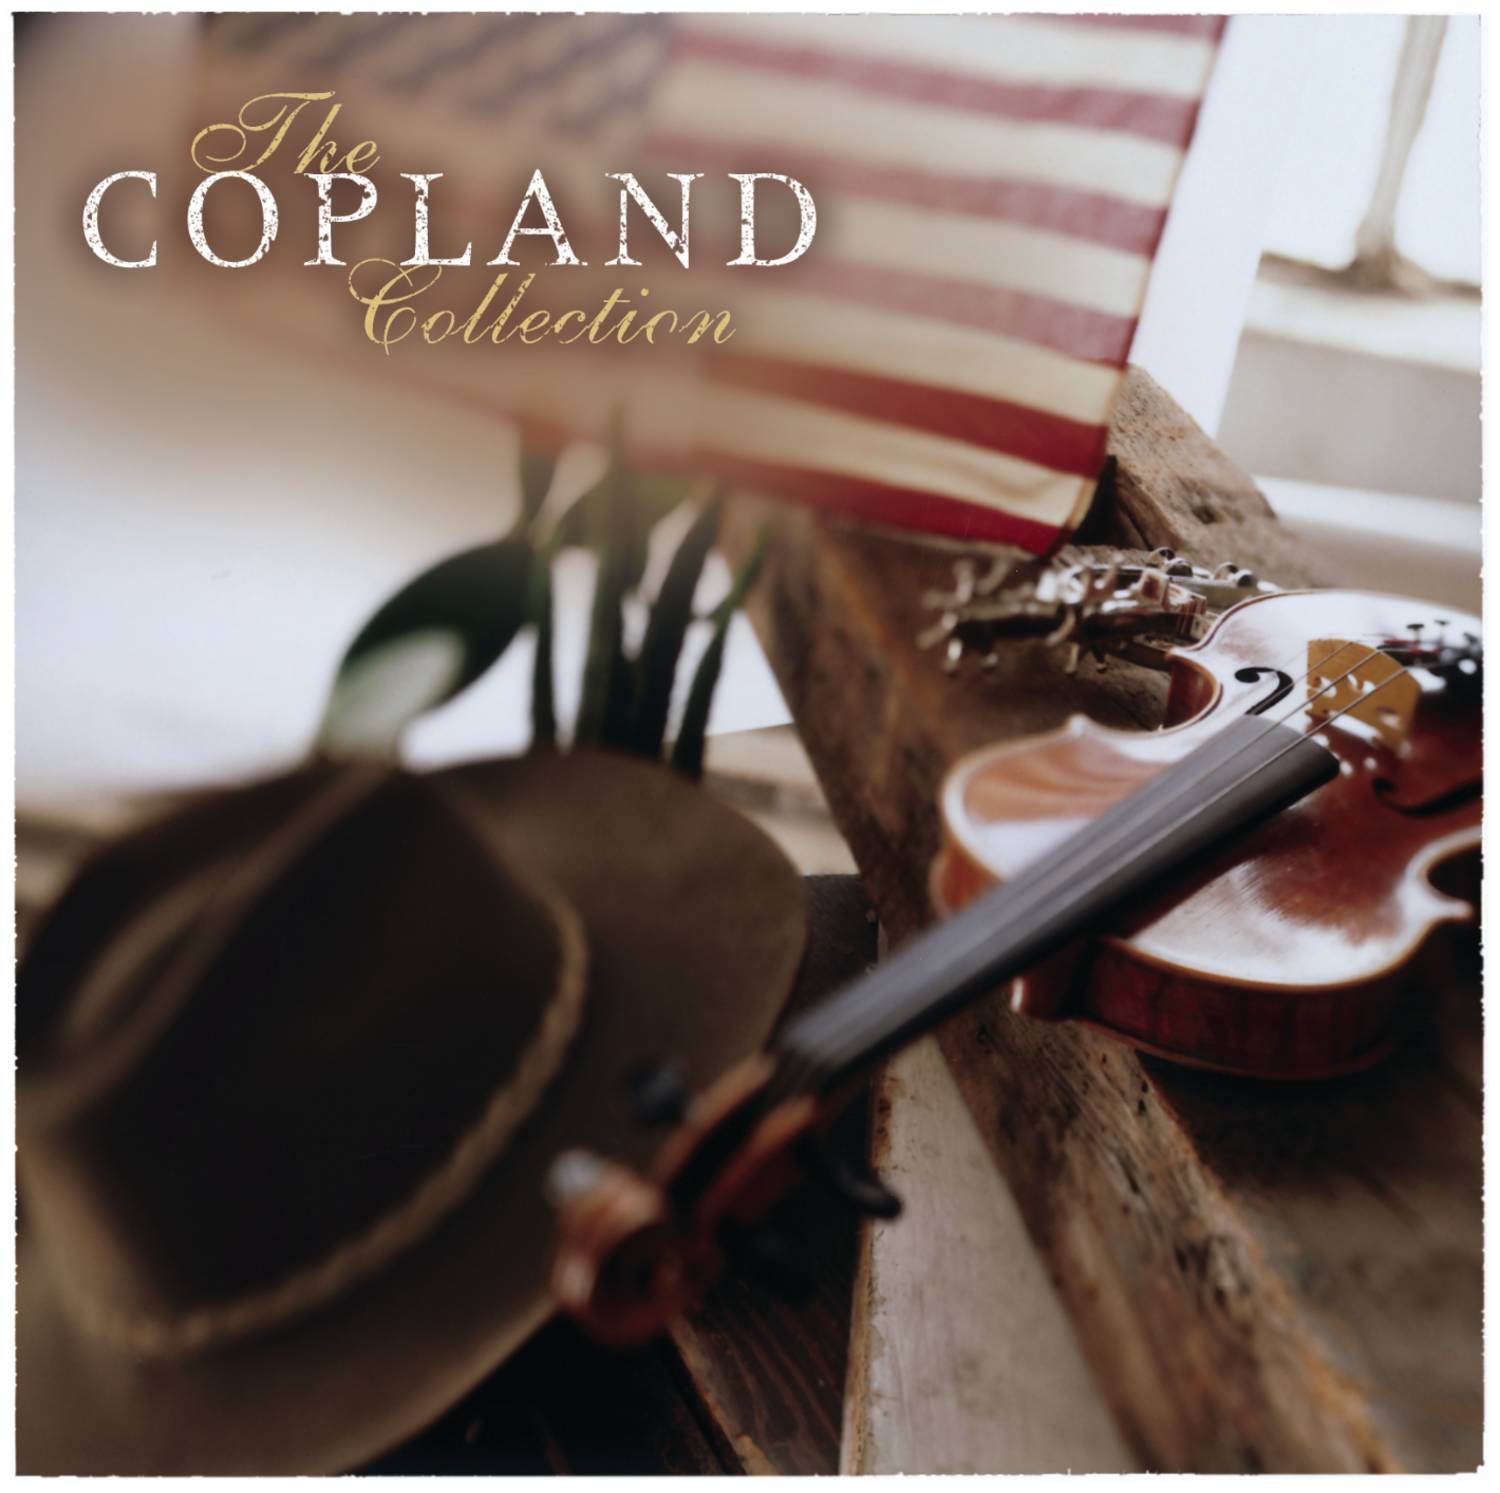 The Copland Collection